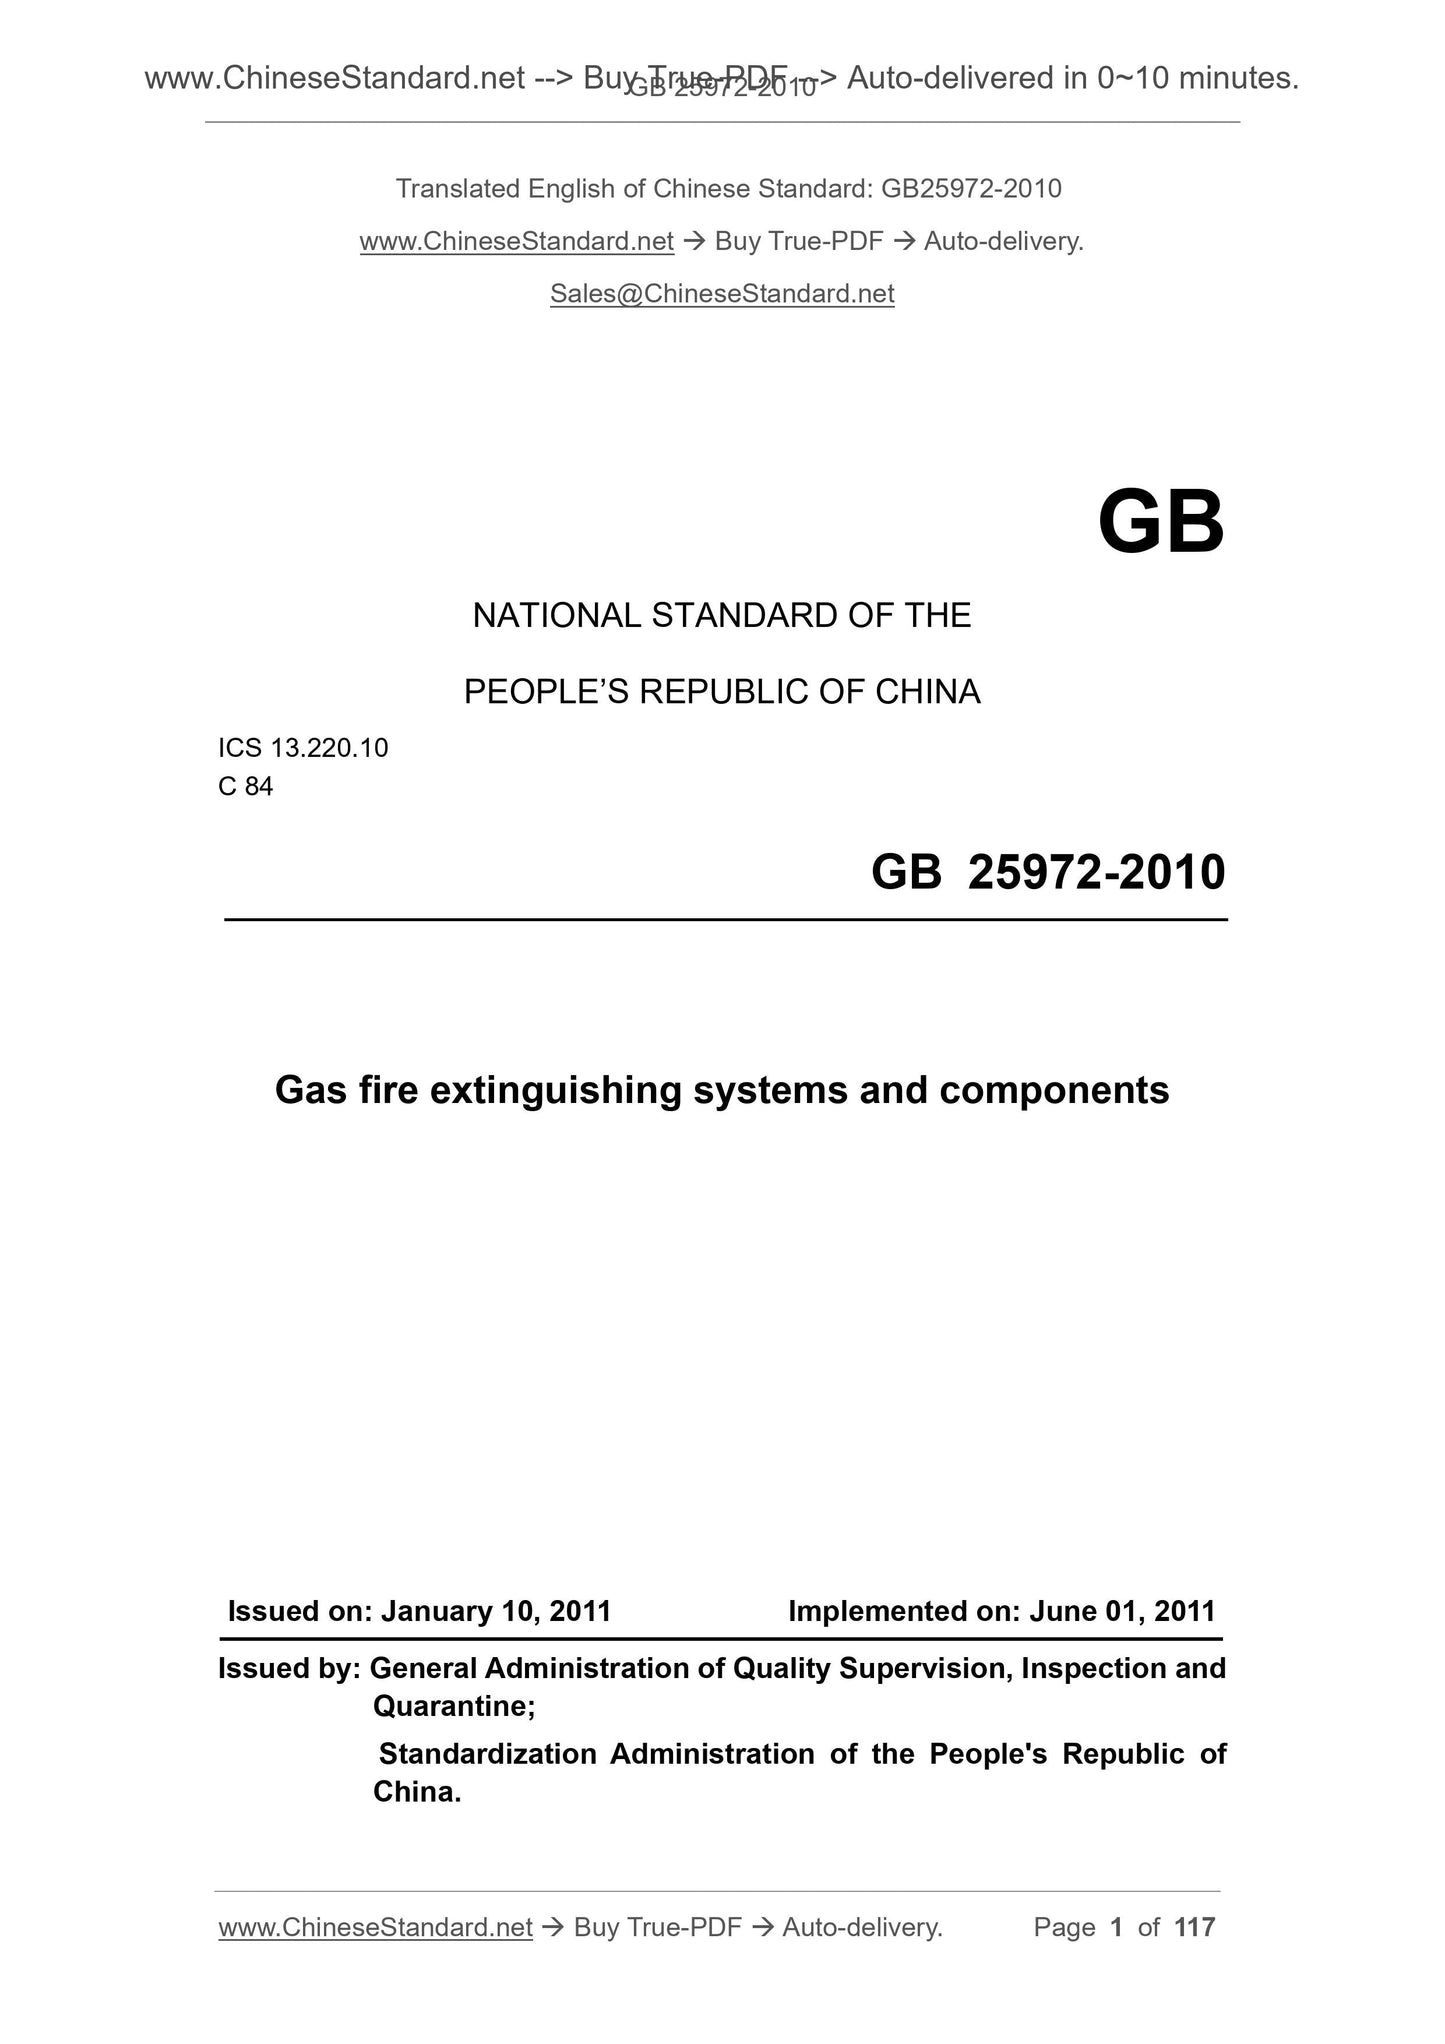 GB 25972-2010 Page 1